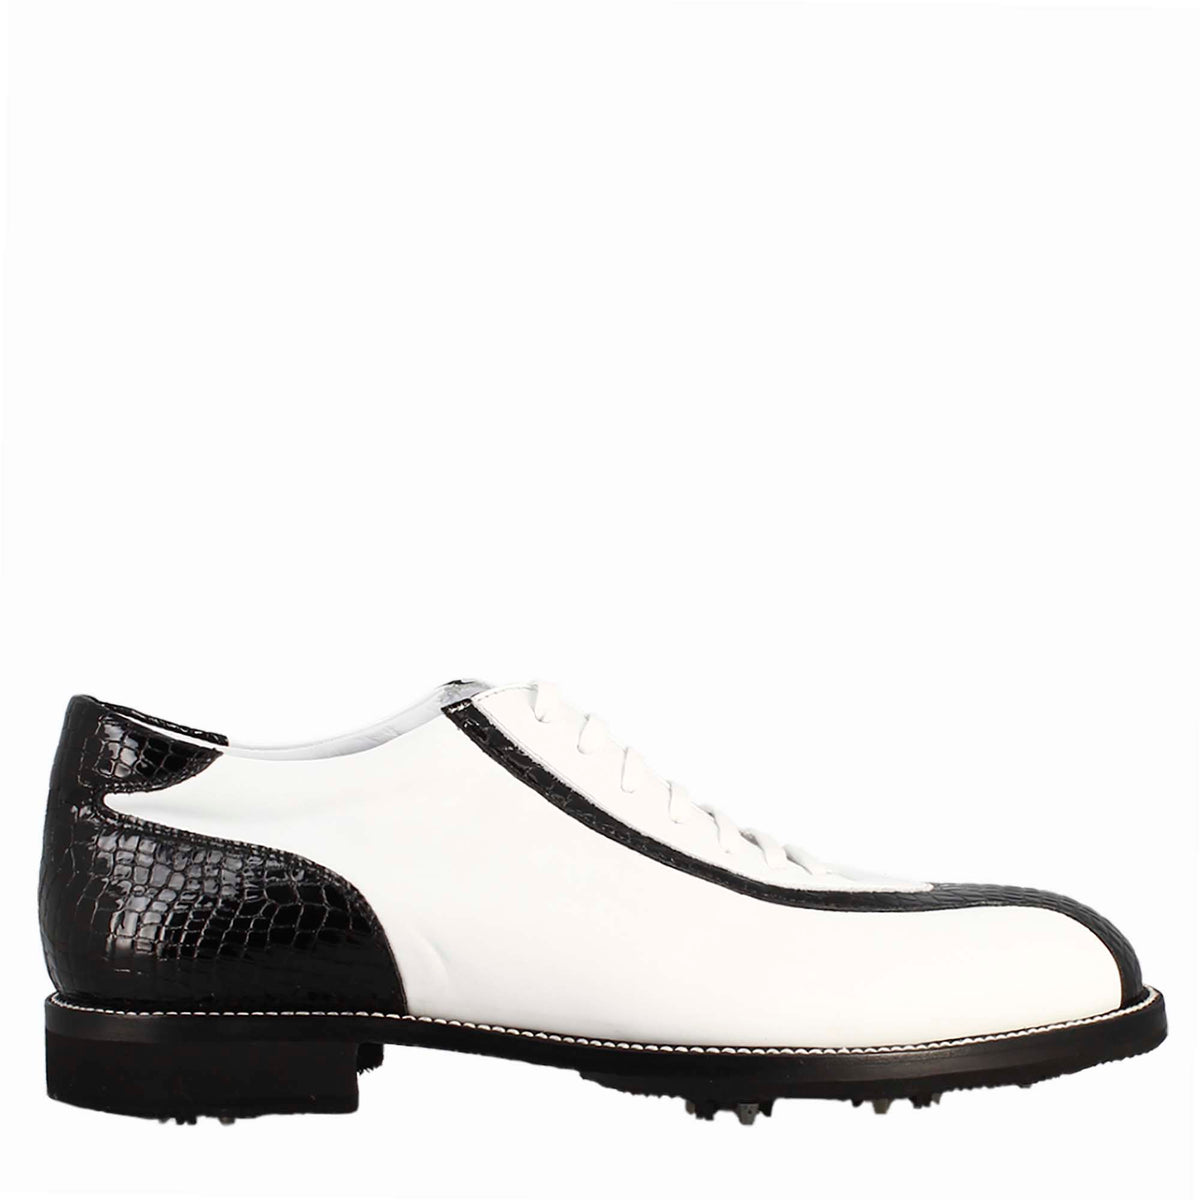 Handcrafted men's golf shoes in white leather and black coconut detailing